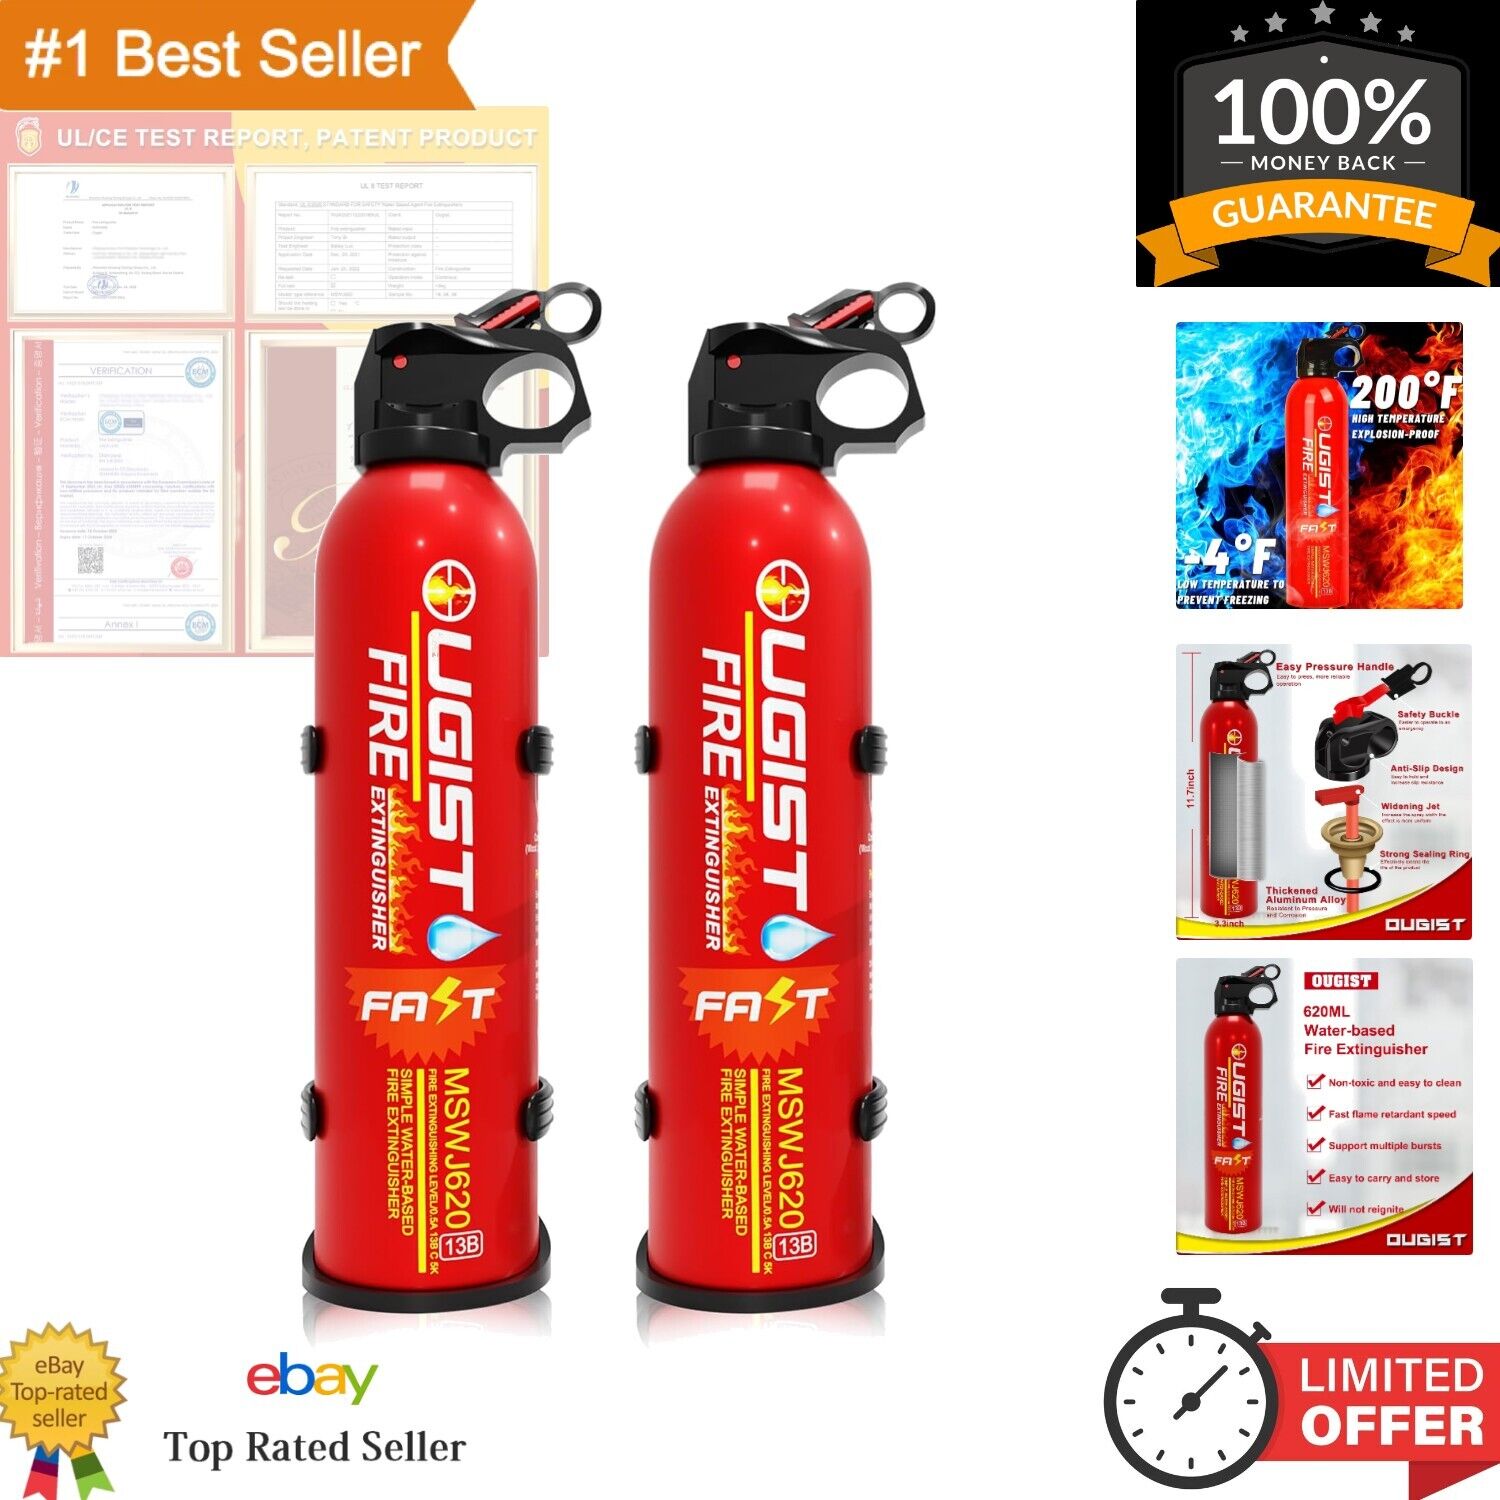 Fire Extinguisher for Home 620ml 2 Count,Can Prevent Re-Ignition,Best Suitabl...